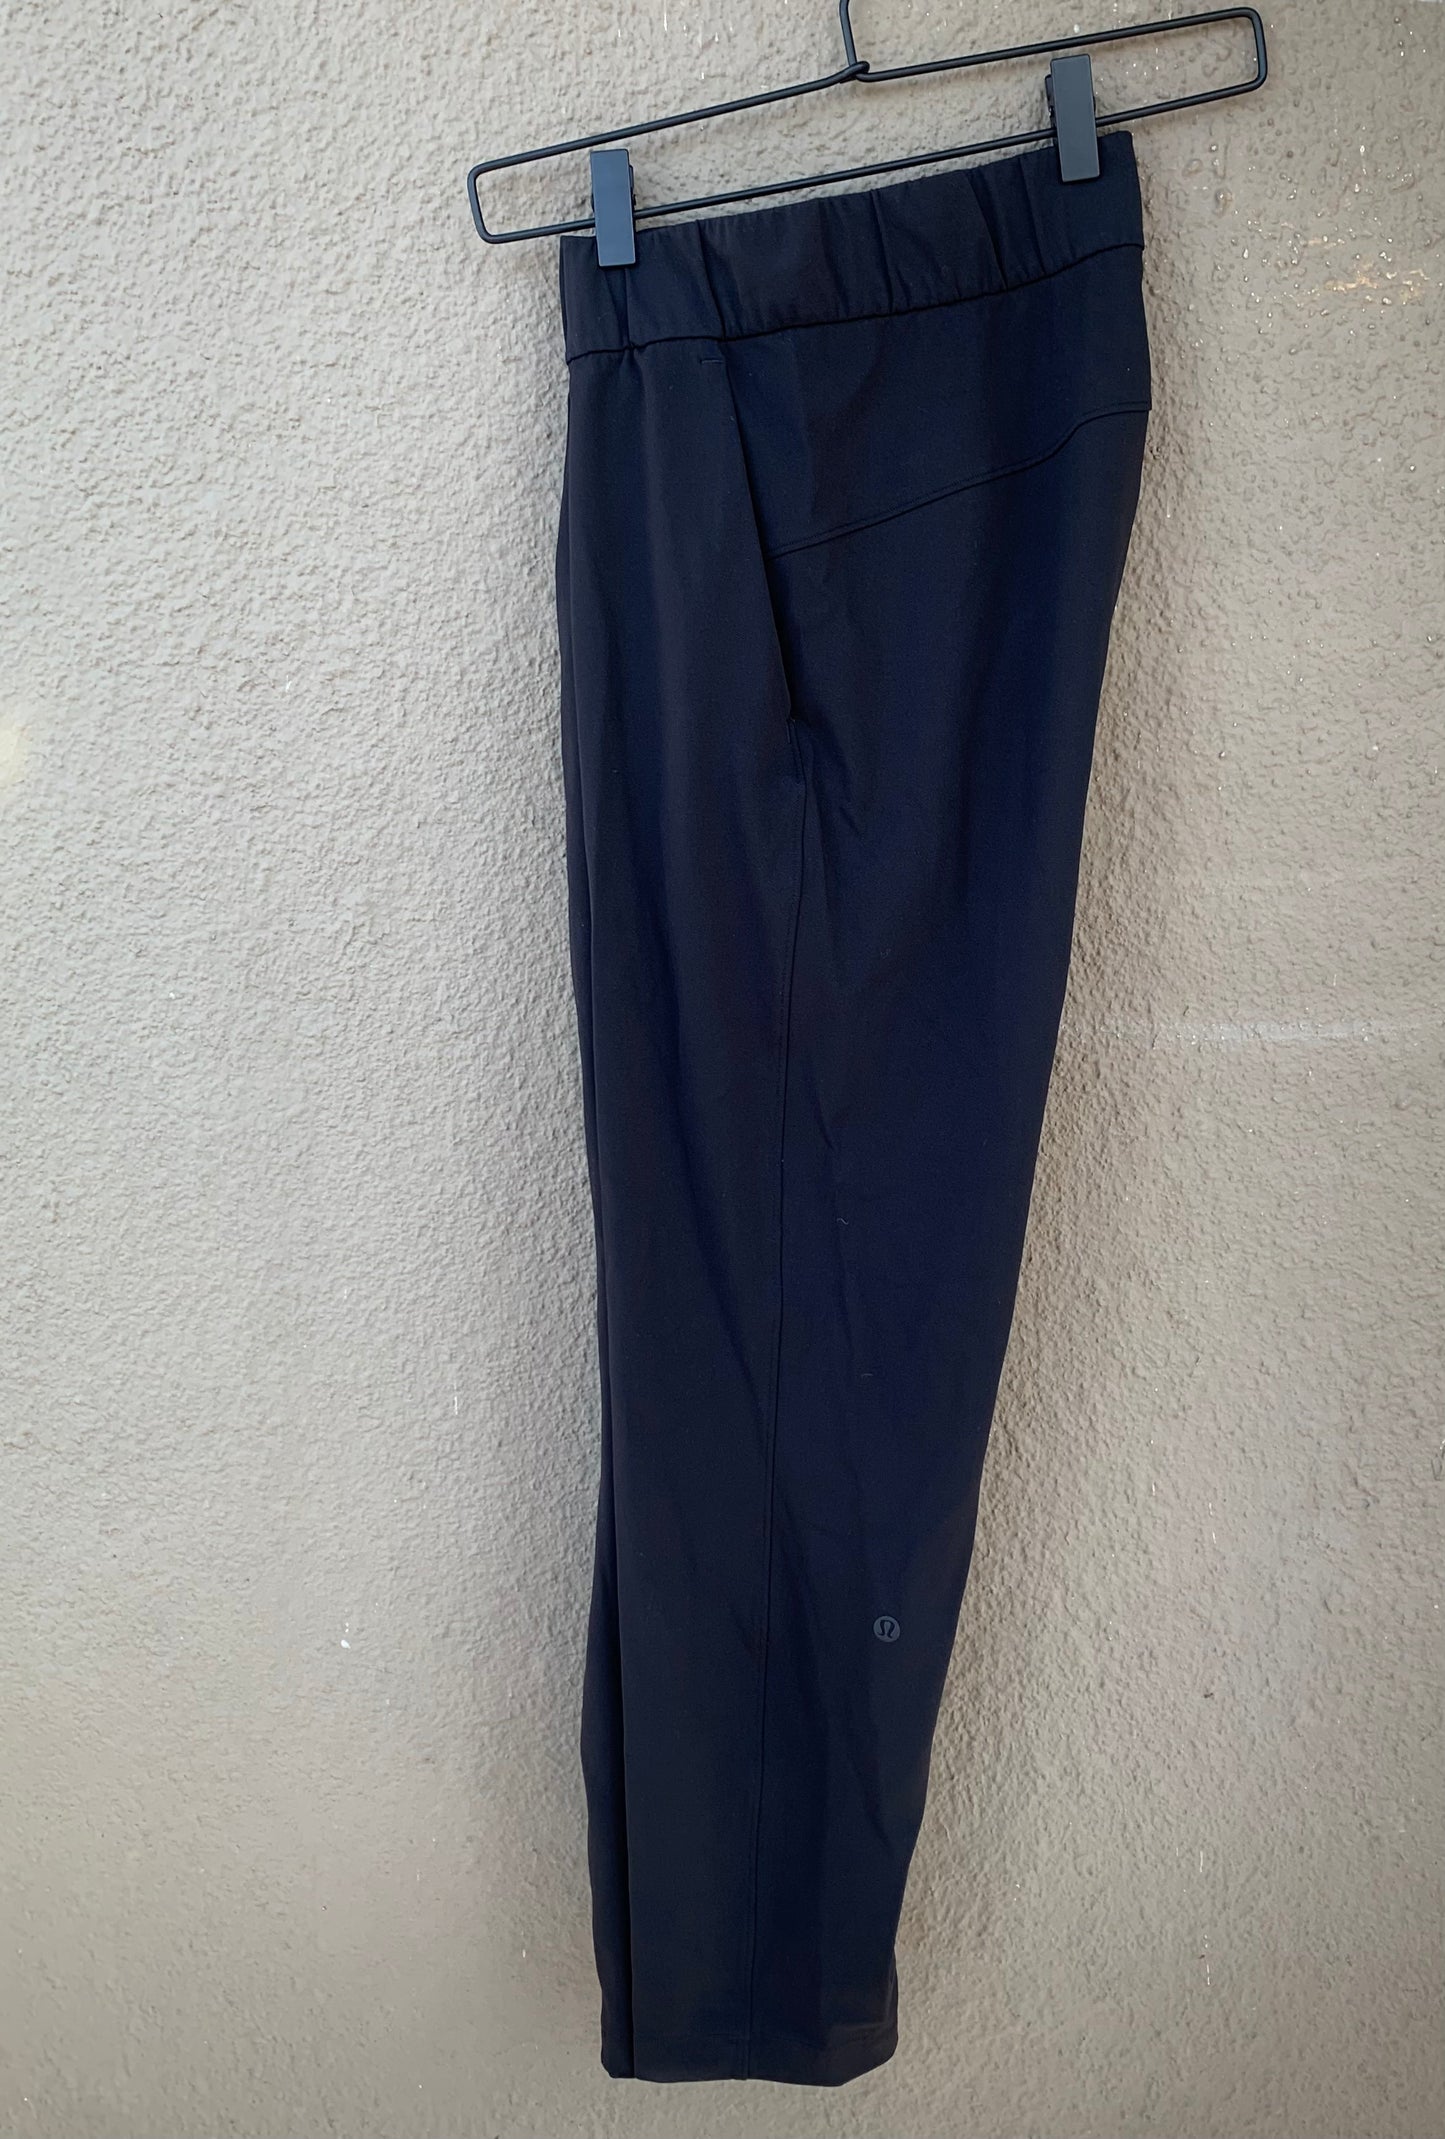 lululemon On The Fly 7/8 Pant in Black - Size 6